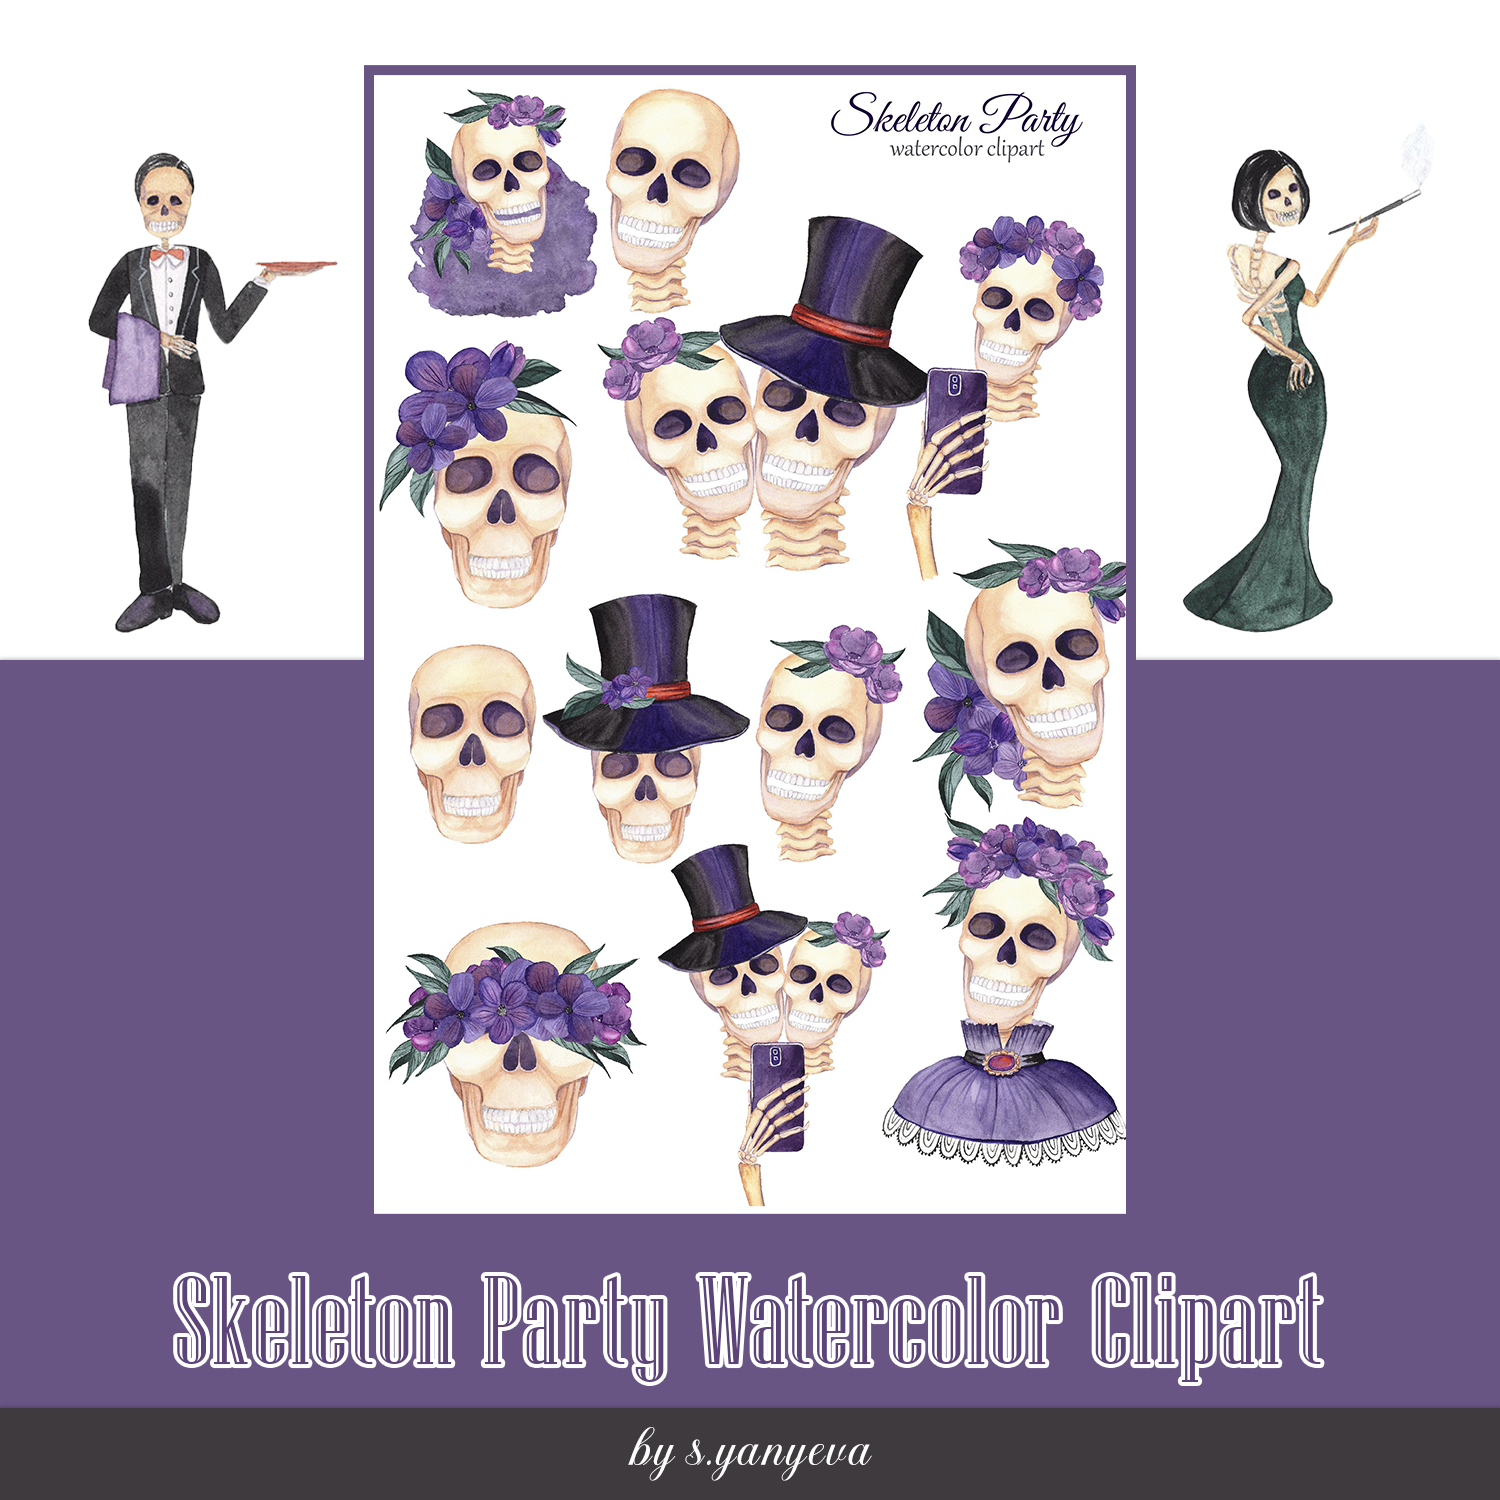 Skeleton party watercolor clipart preview.